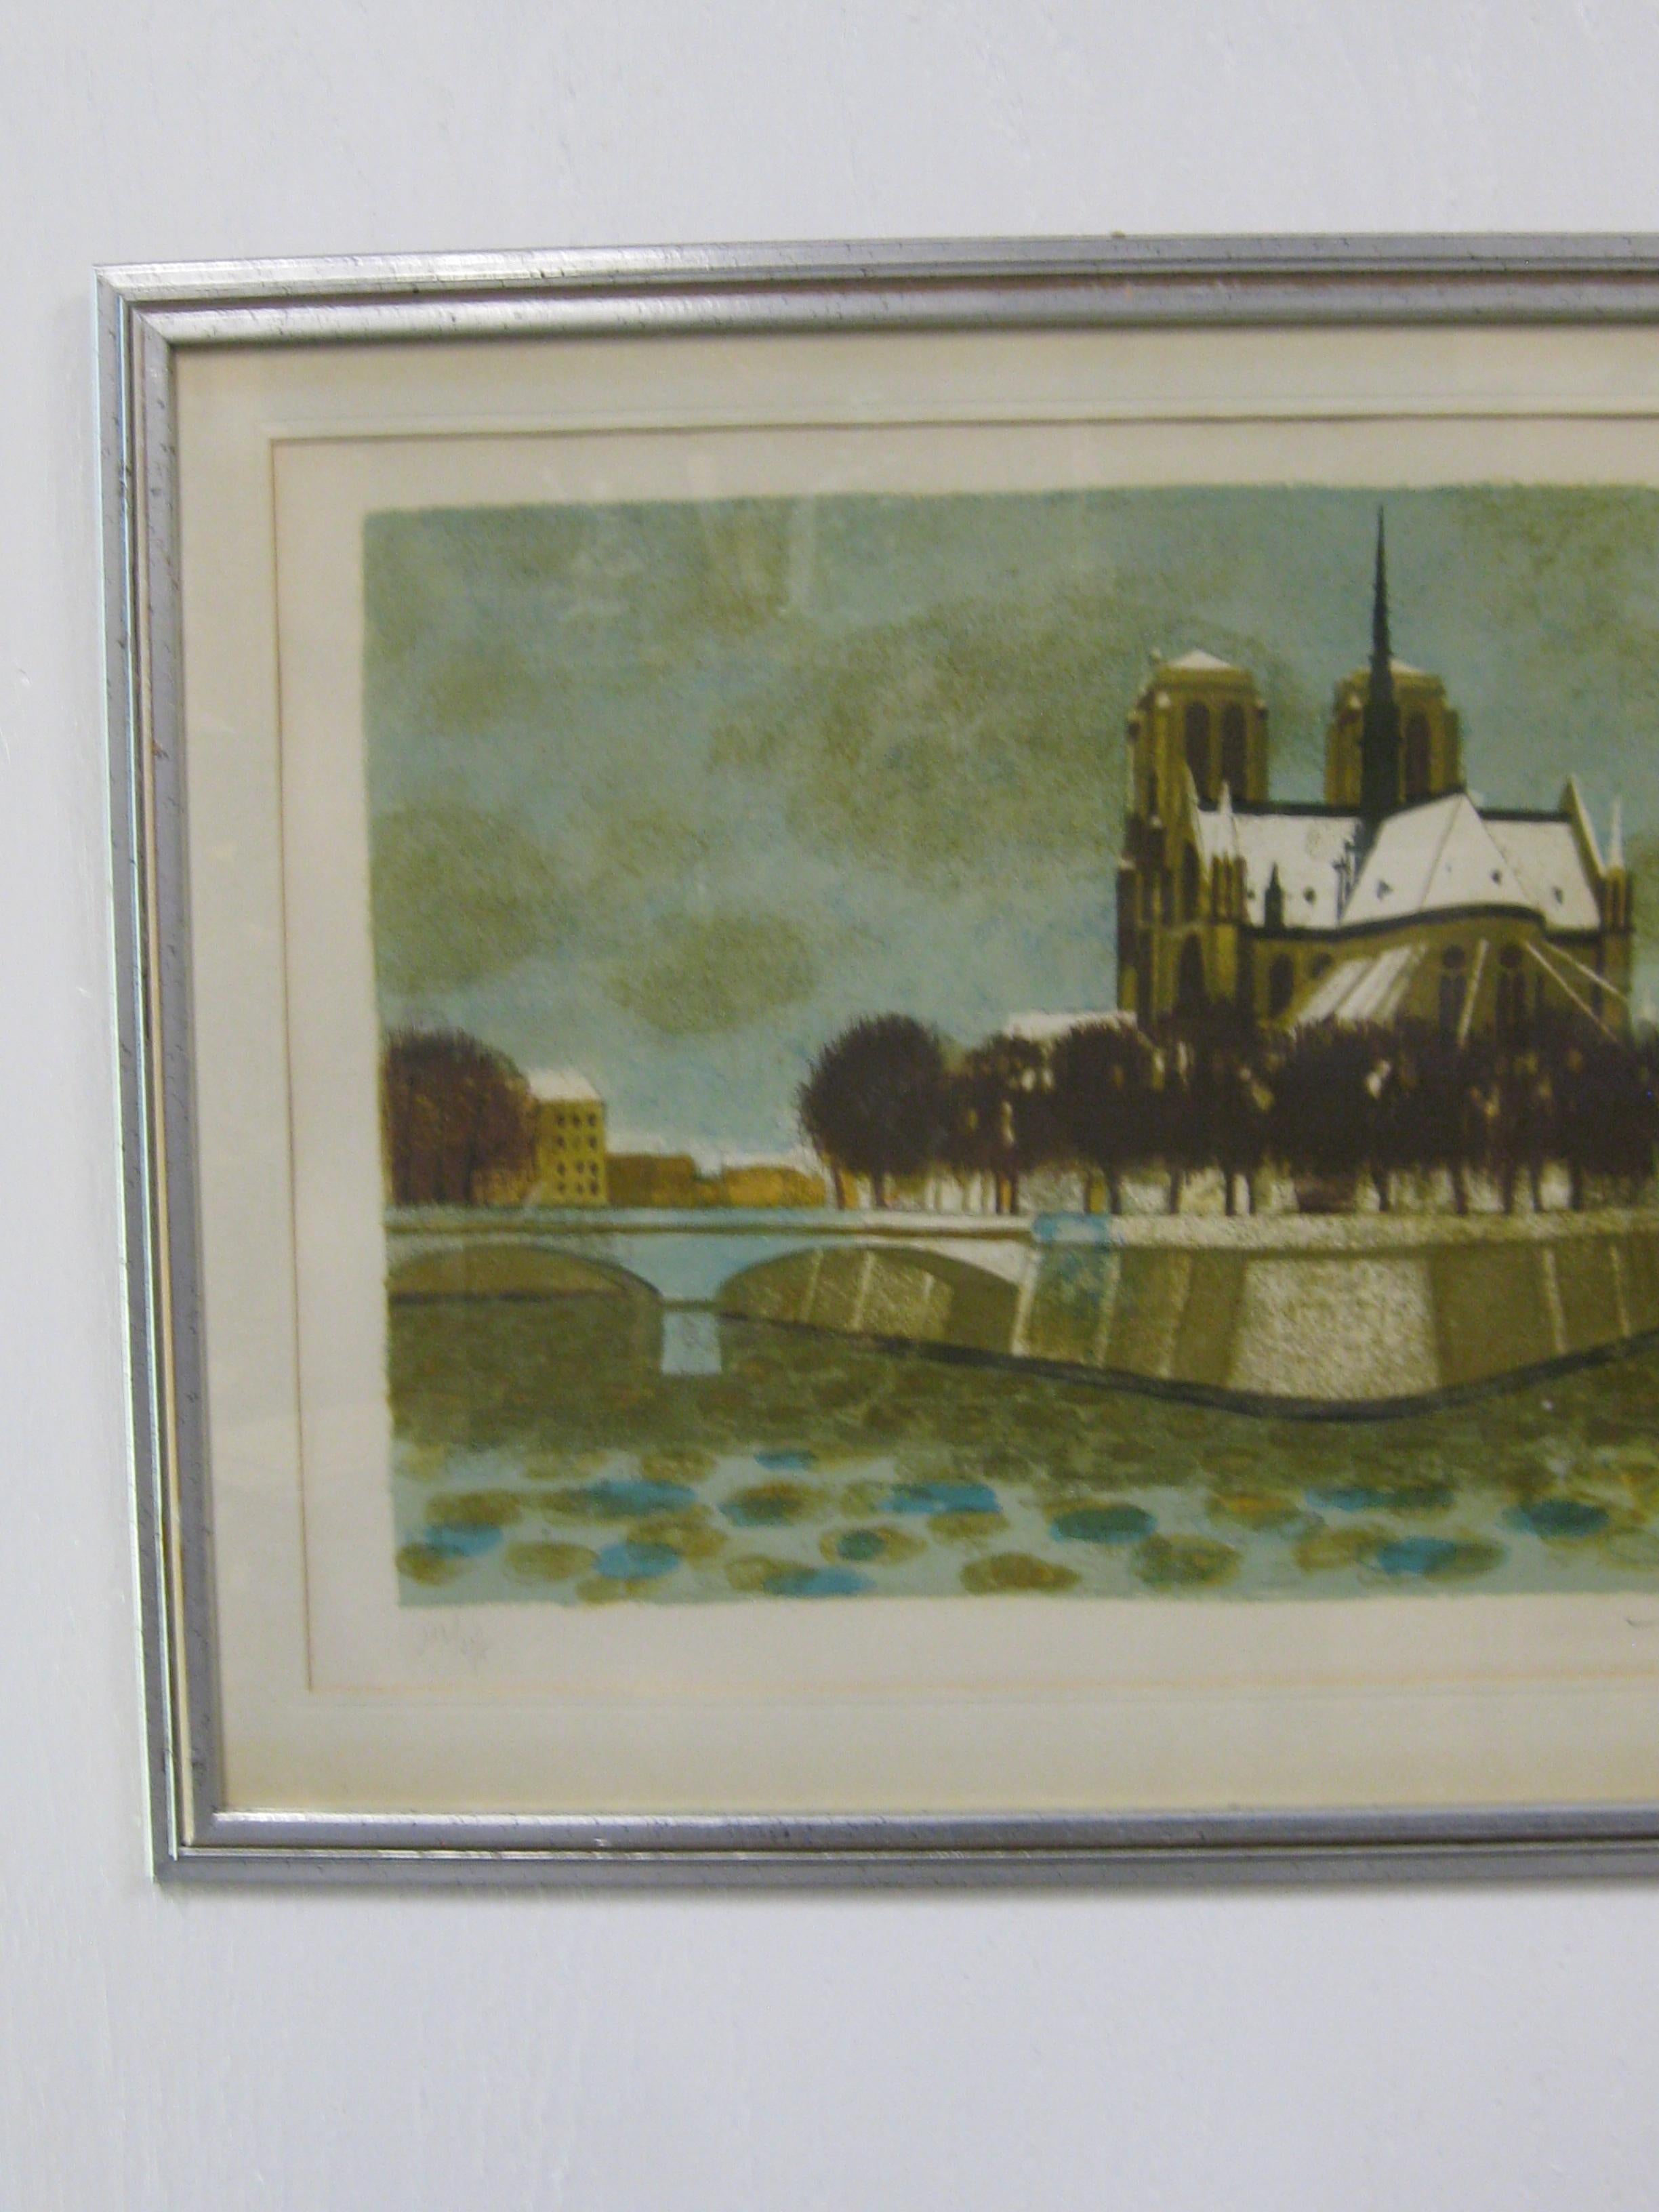 Wonderful hand signed and numbered abstract lithograph by French listed artist Yves Ganne, circa 1970's. The lithograph features Notre Dame in Paris, France. Vibrant colors. The art was sold through The collector’s Guild in New York City. Comes in